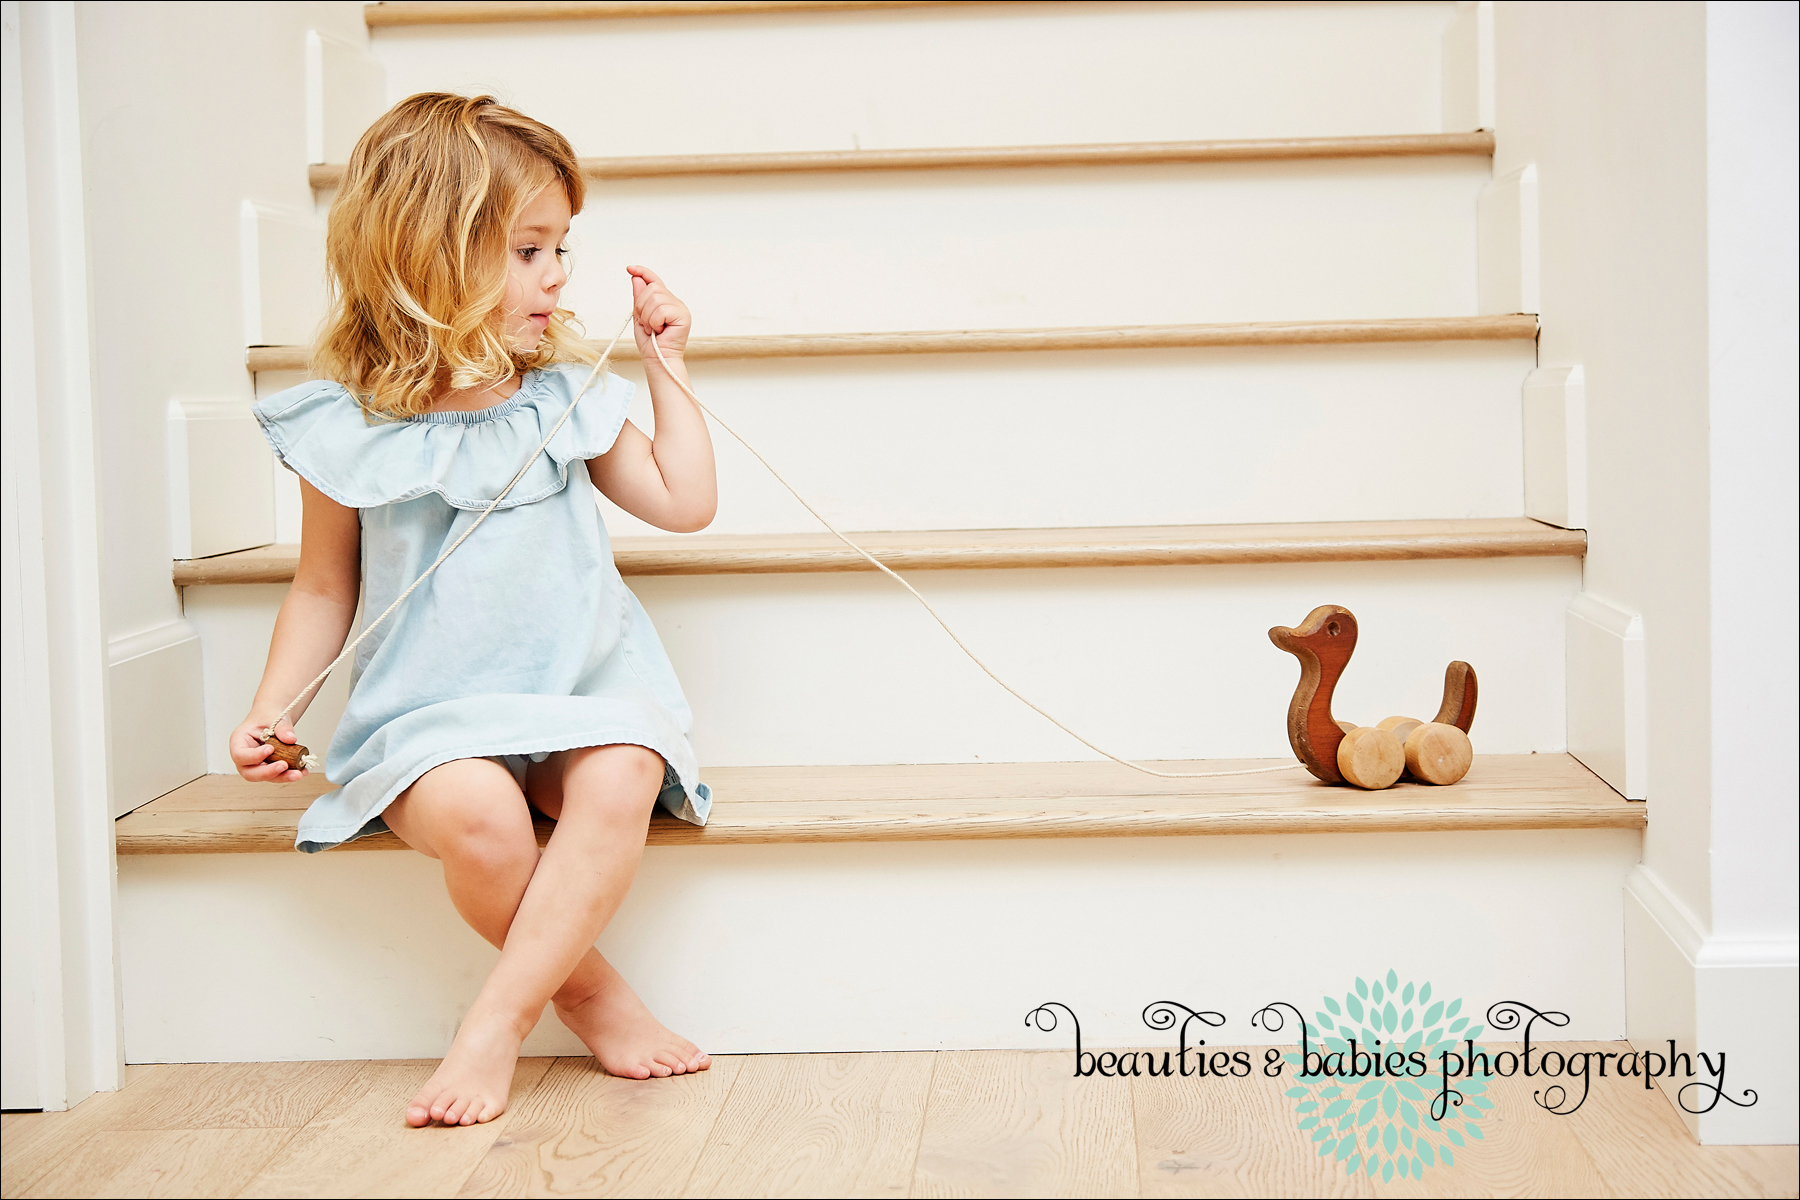 Los Angeles family photographer, kids and baby professional photographer Los Angeles, Los Angeles children's photographer, Family photography Los Angeles photographer, Best family photographer Los Angeles